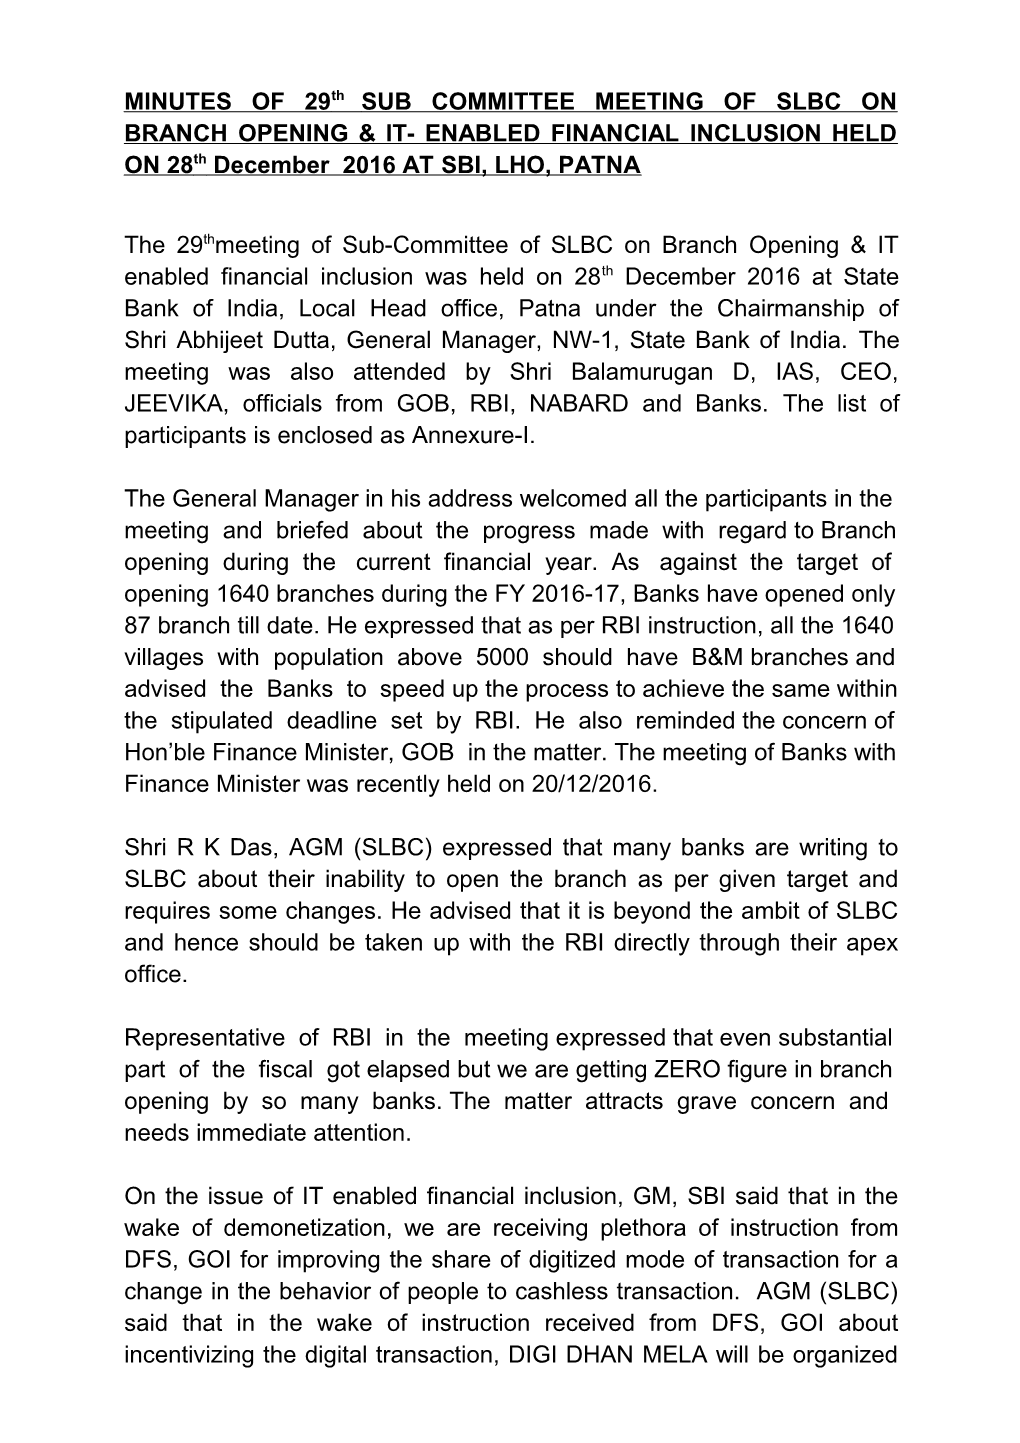 MINUTES of 24Th SUB COMMITTEE MEETING of SLBC on BRANCH OPENING & IT- ENABLED FINANCIAL